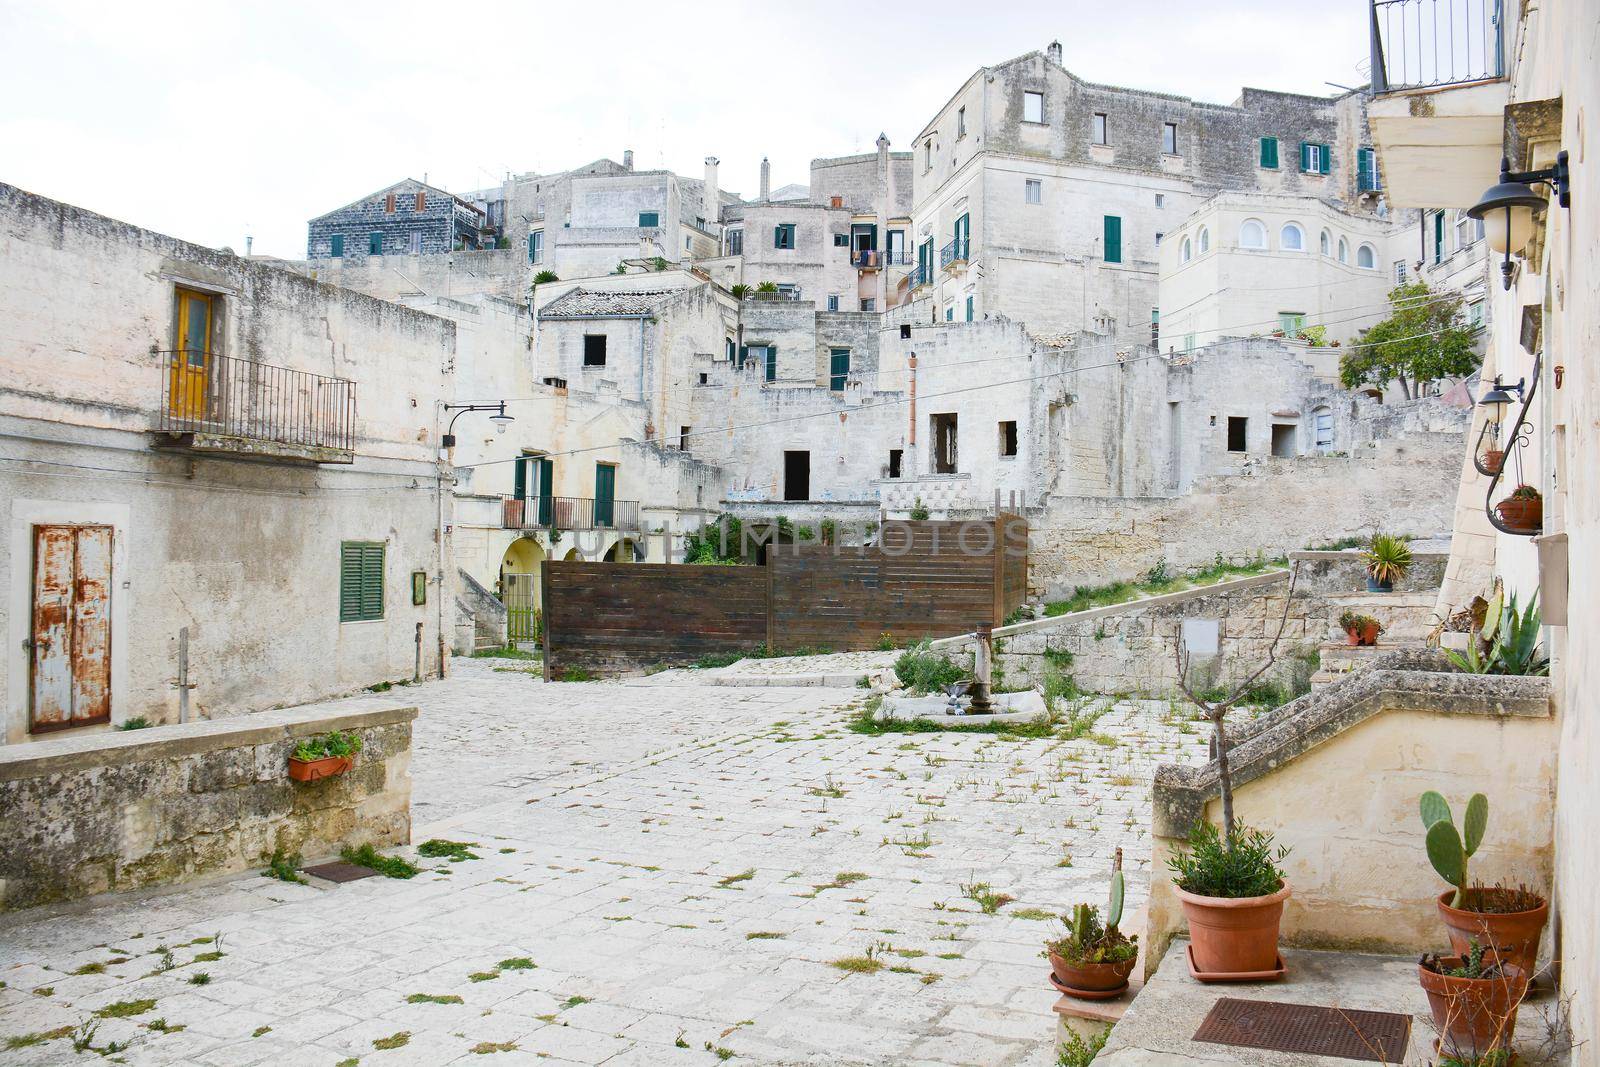 Matera, an ancient courtyard carved into the rock and the houses also dug into the mountain